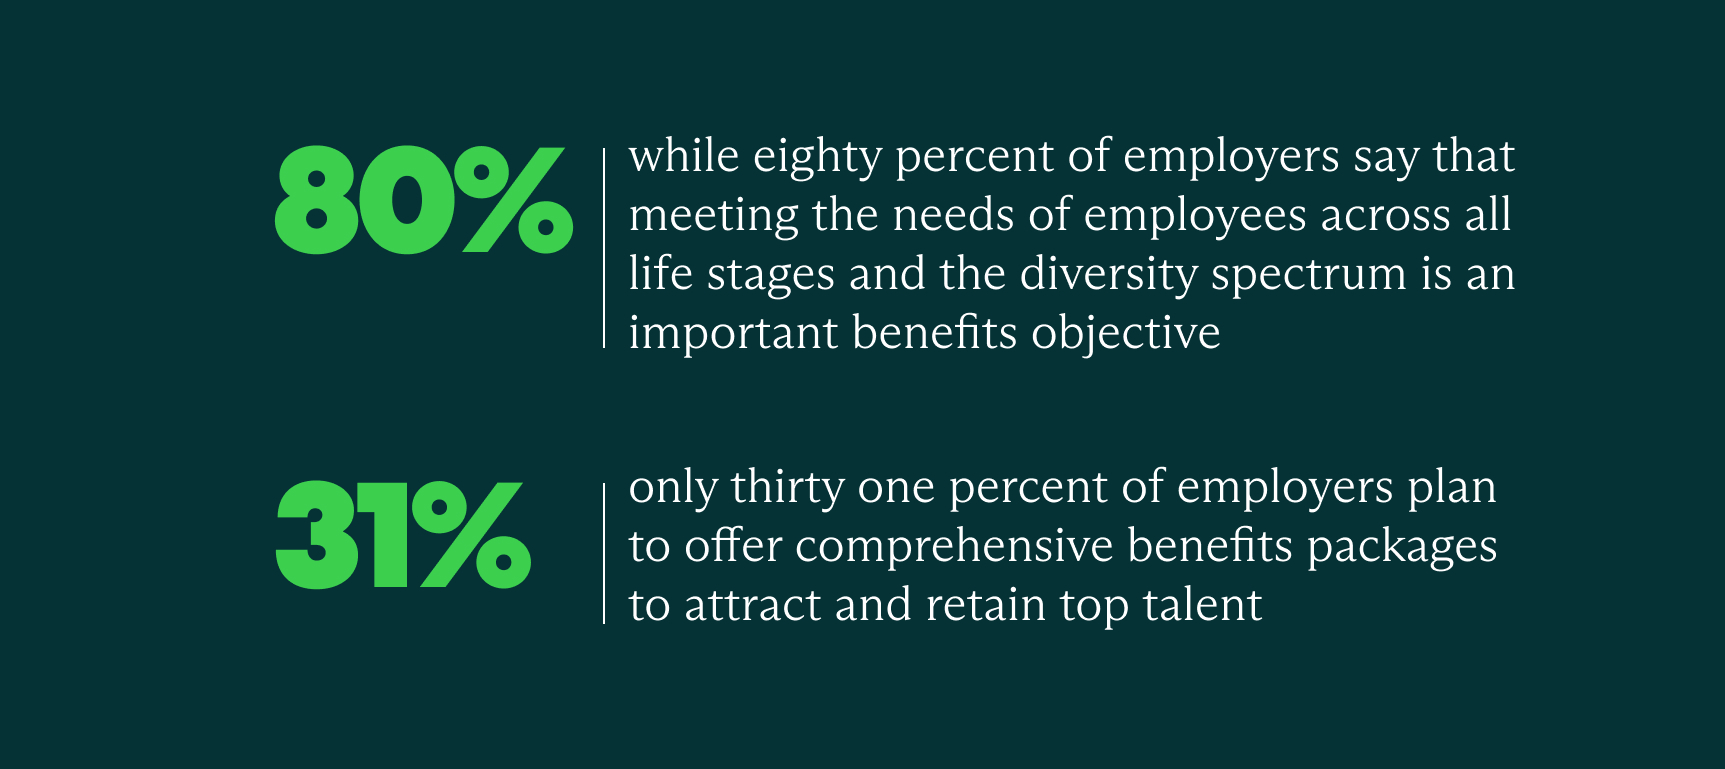 Stats on offering employee benefits: While 80% of employers say that meeting the needs of employees is an important benefits objective, only 31% of employers plan to offer comprehensive benefits packages to attract and retain top talent.